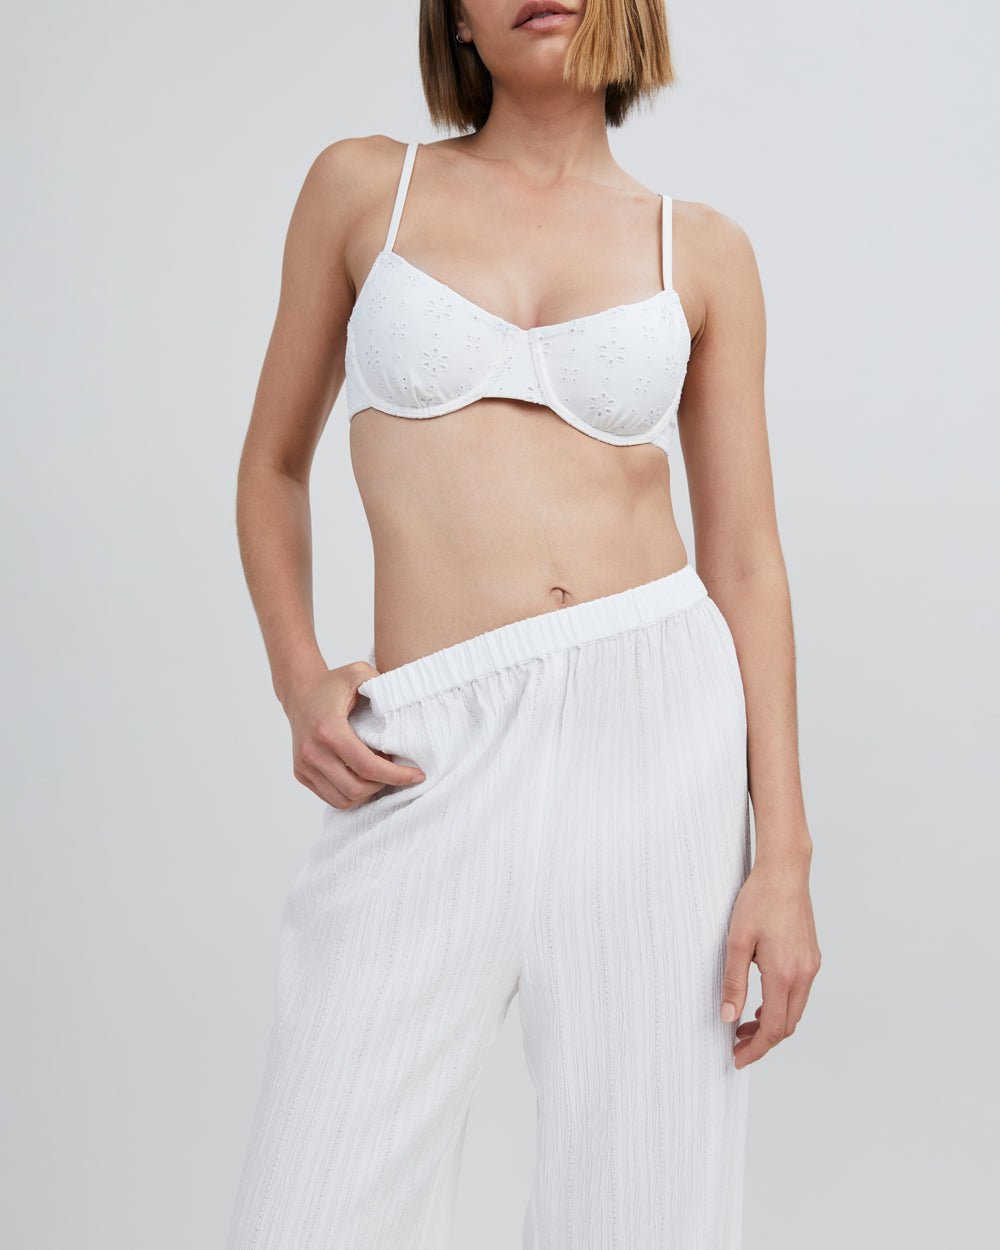 The Milly Pant - Solid & Striped